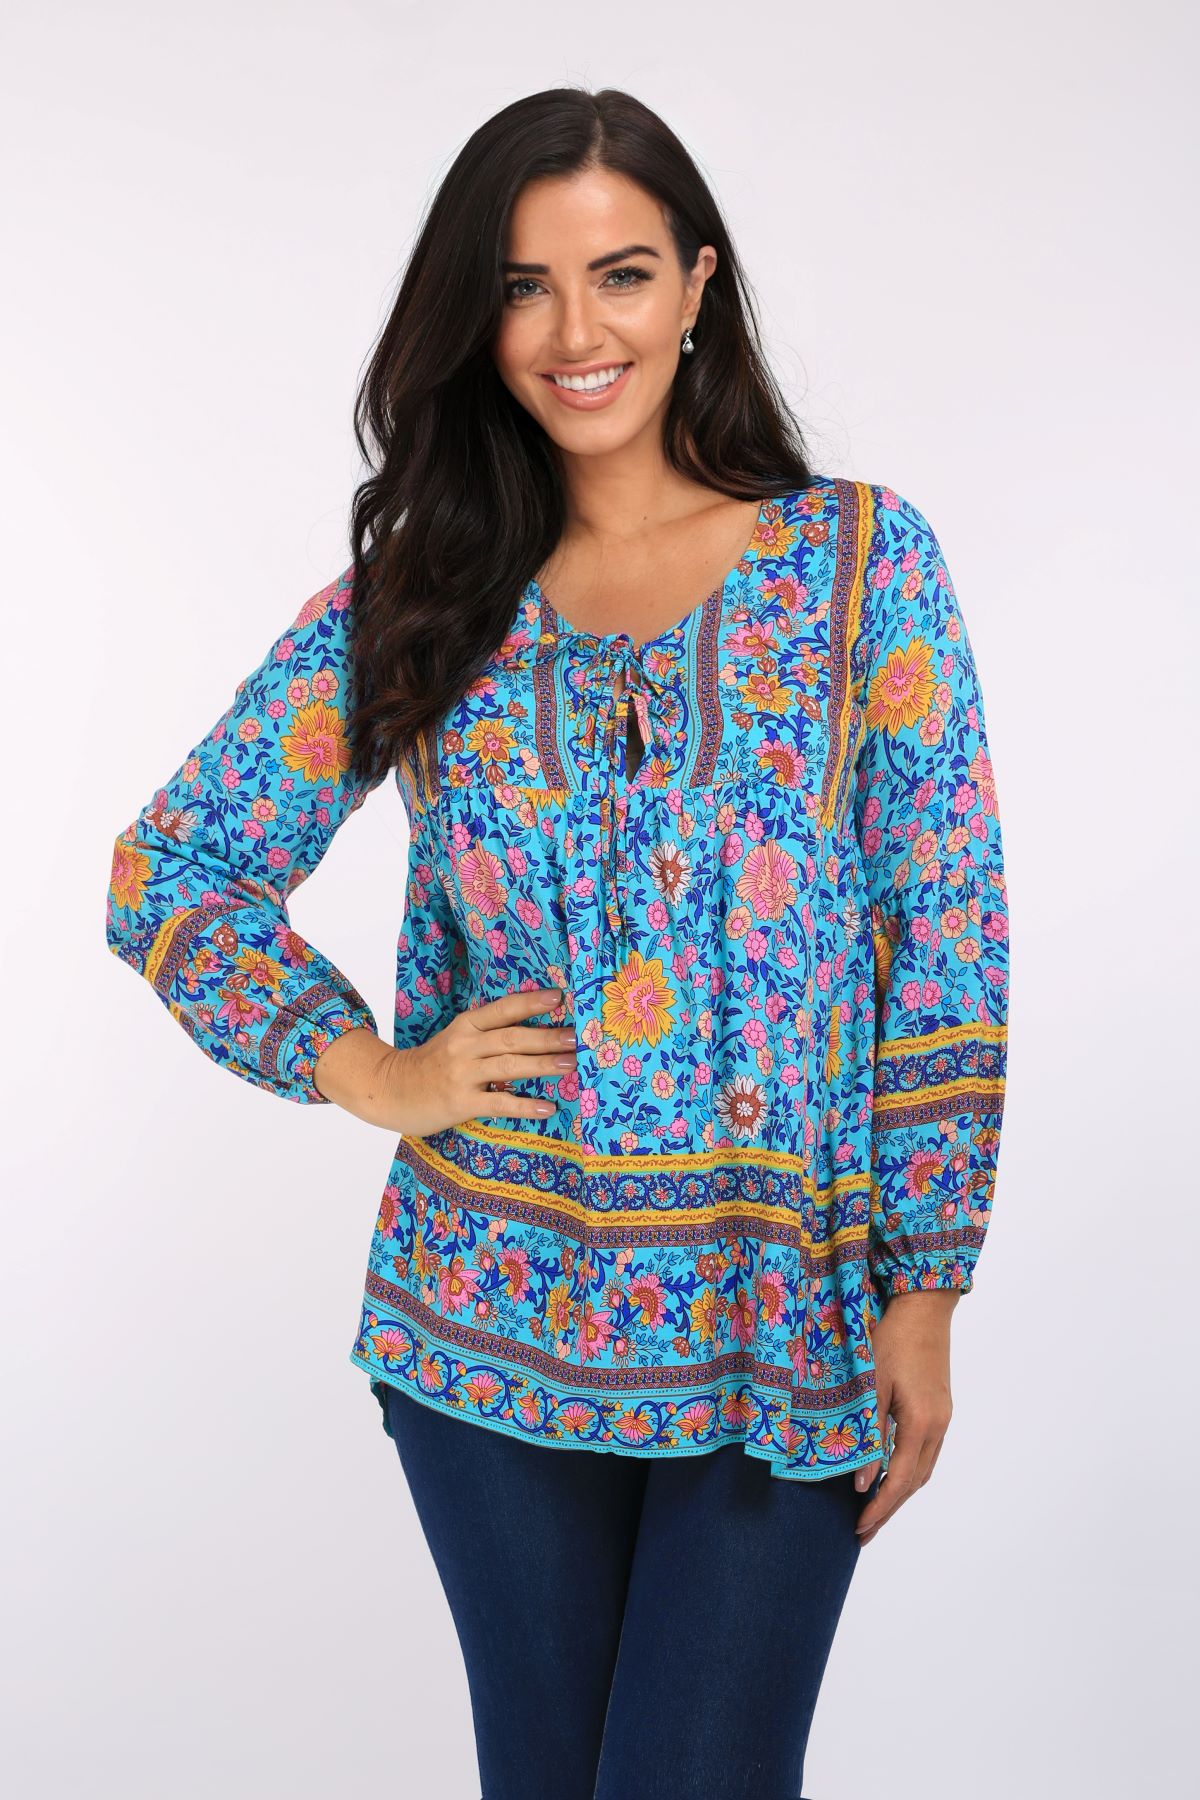 Boho Peasant Top with long sleeves - LUNA - OMBAK